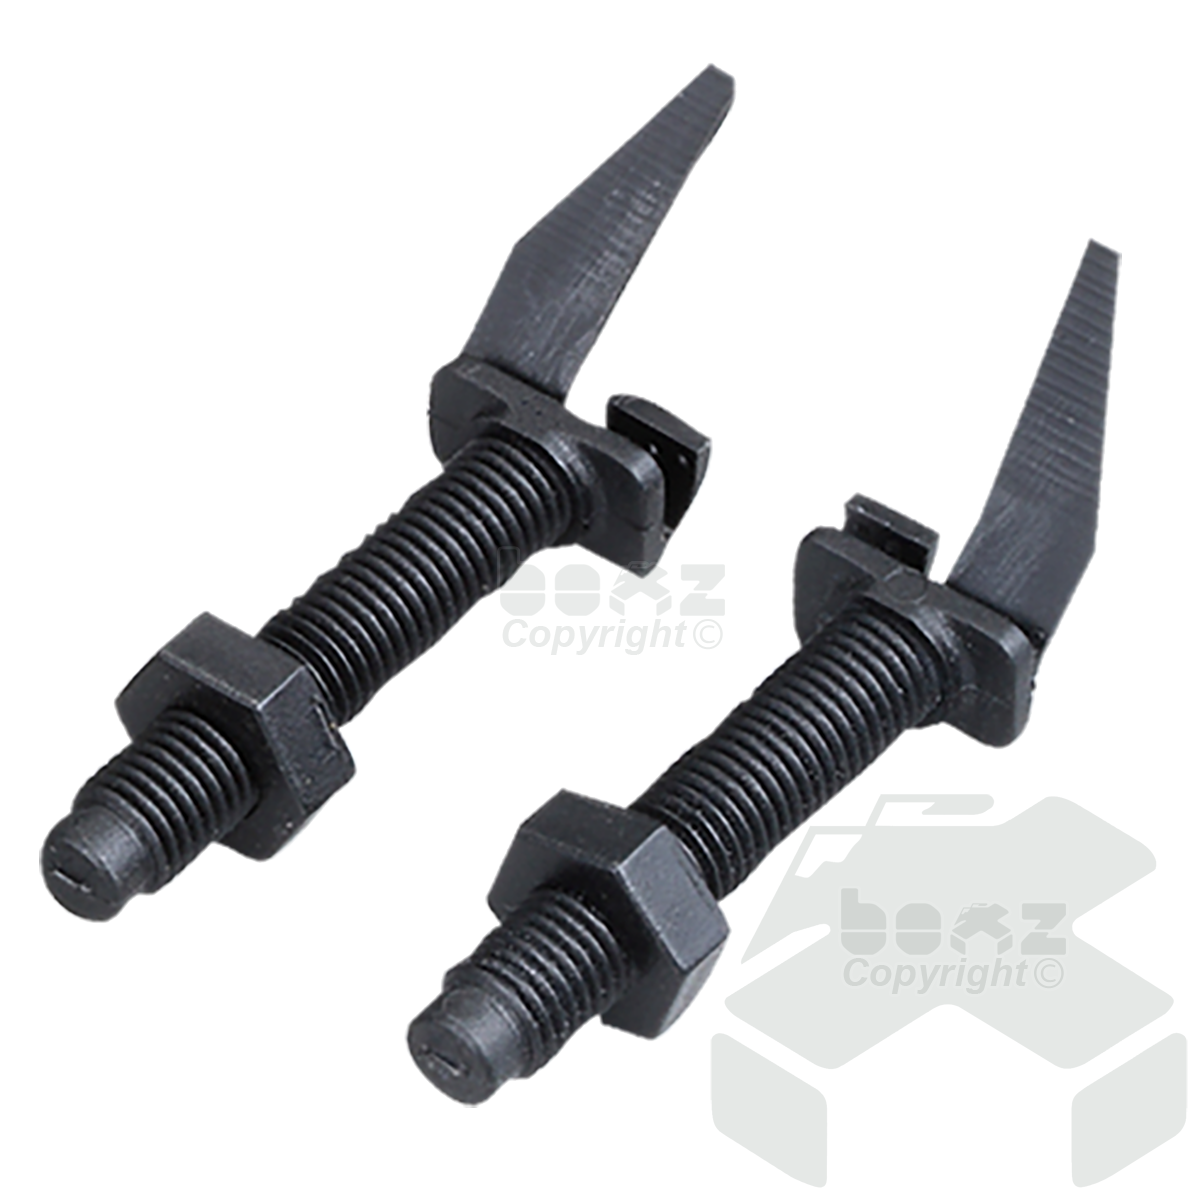 EK Archery Screw-in Arrow Rest for Compound Bows - Left or Right Handed - Pack of 2